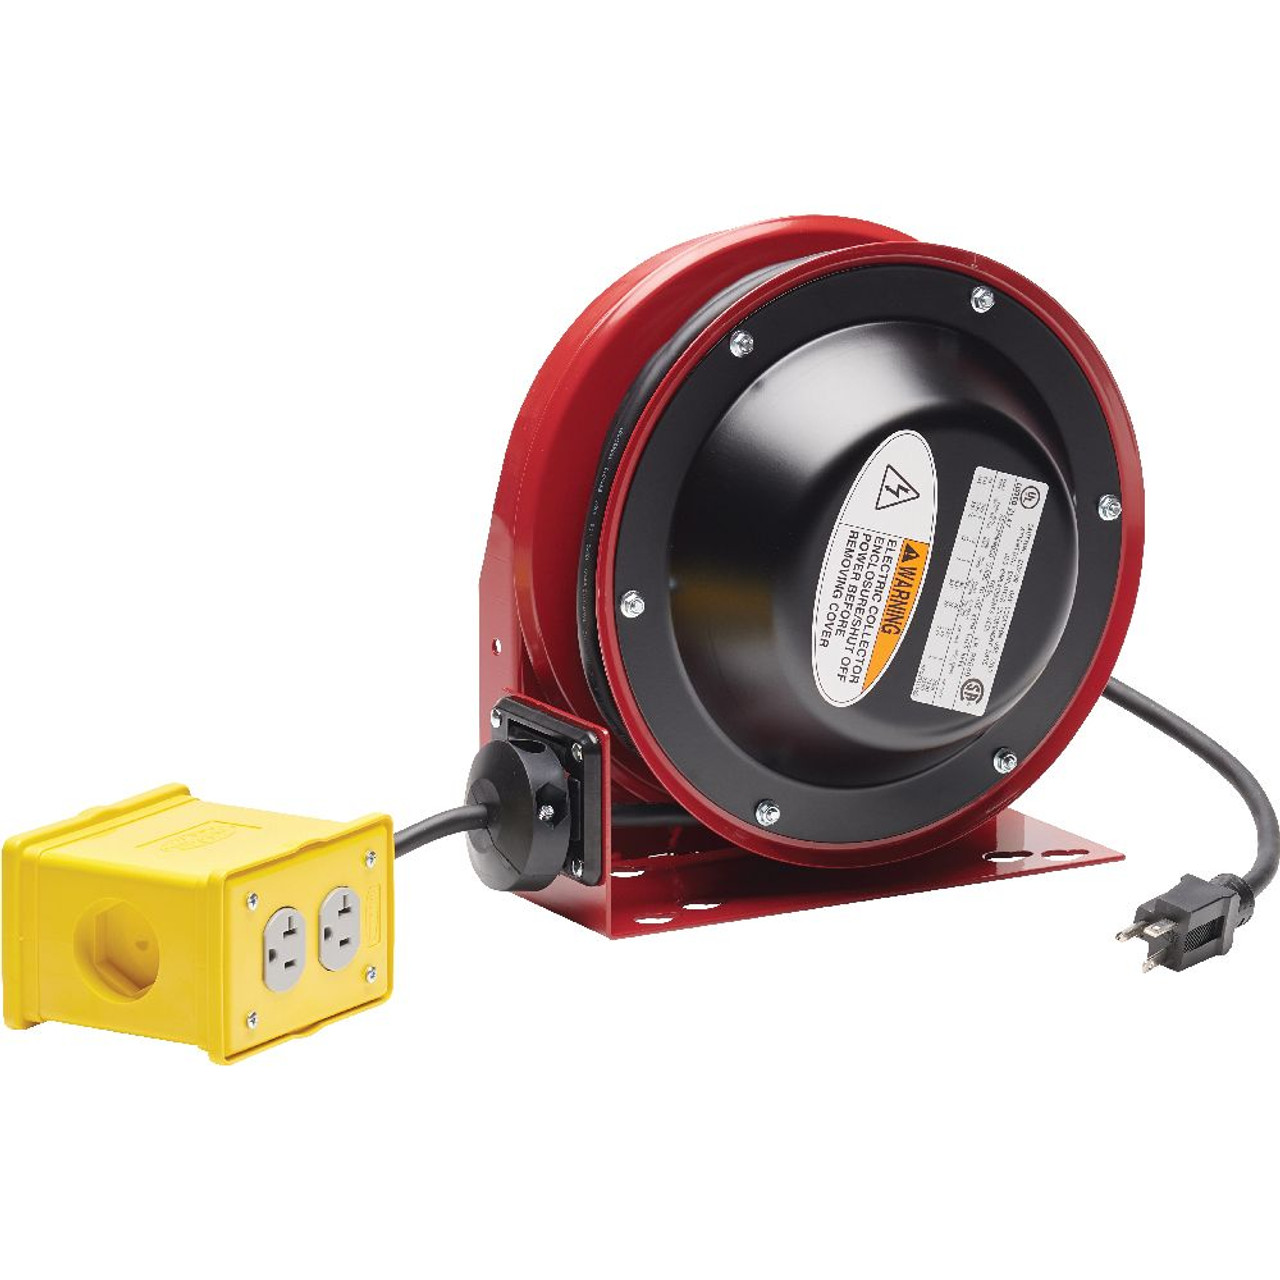 Reelcraft 12/3 30 ft Quad Outlet Box Power Cord Reel